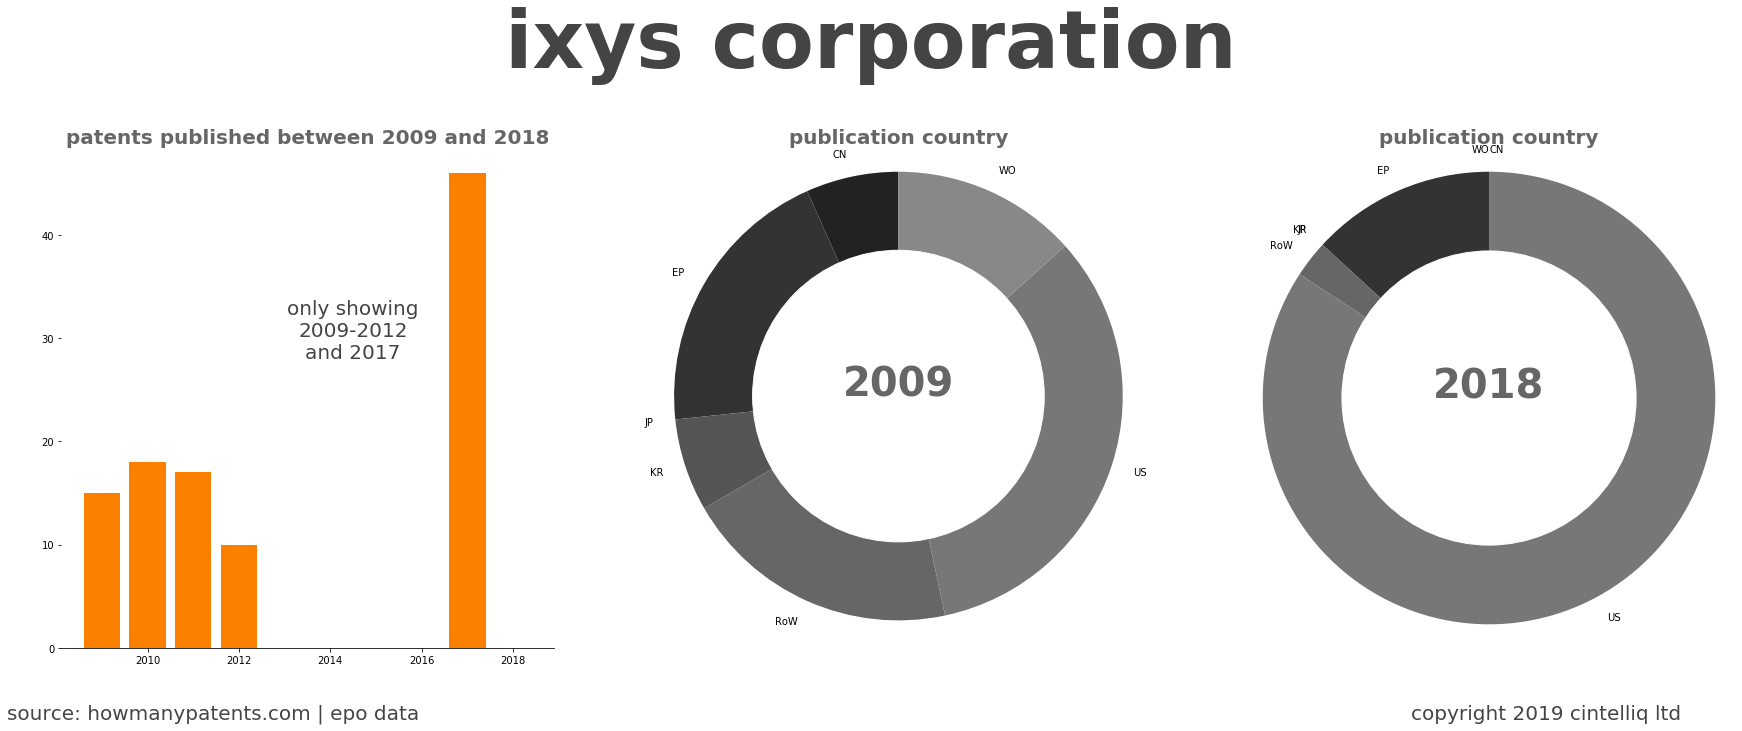 summary of patents for Ixys Corporation